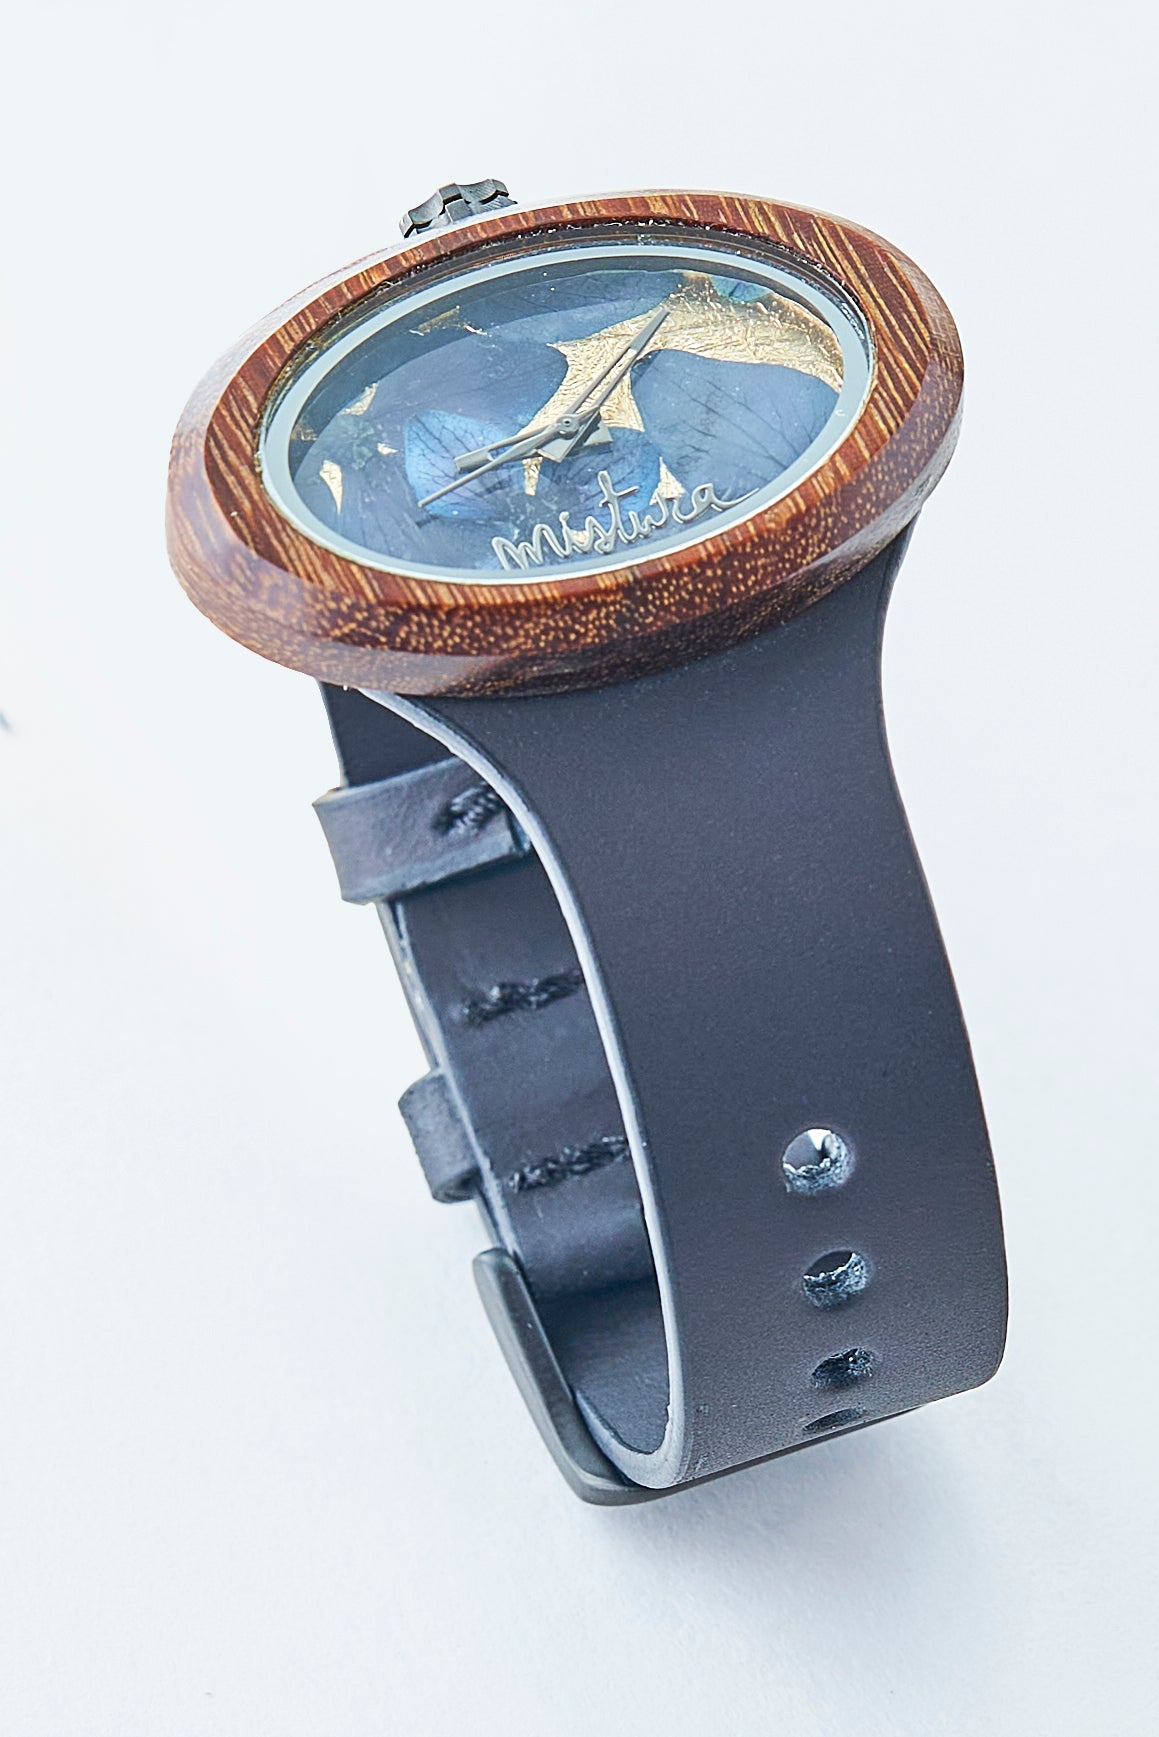 Our Wooden Watches | Natural Wood Watch | Mistura Timepieces